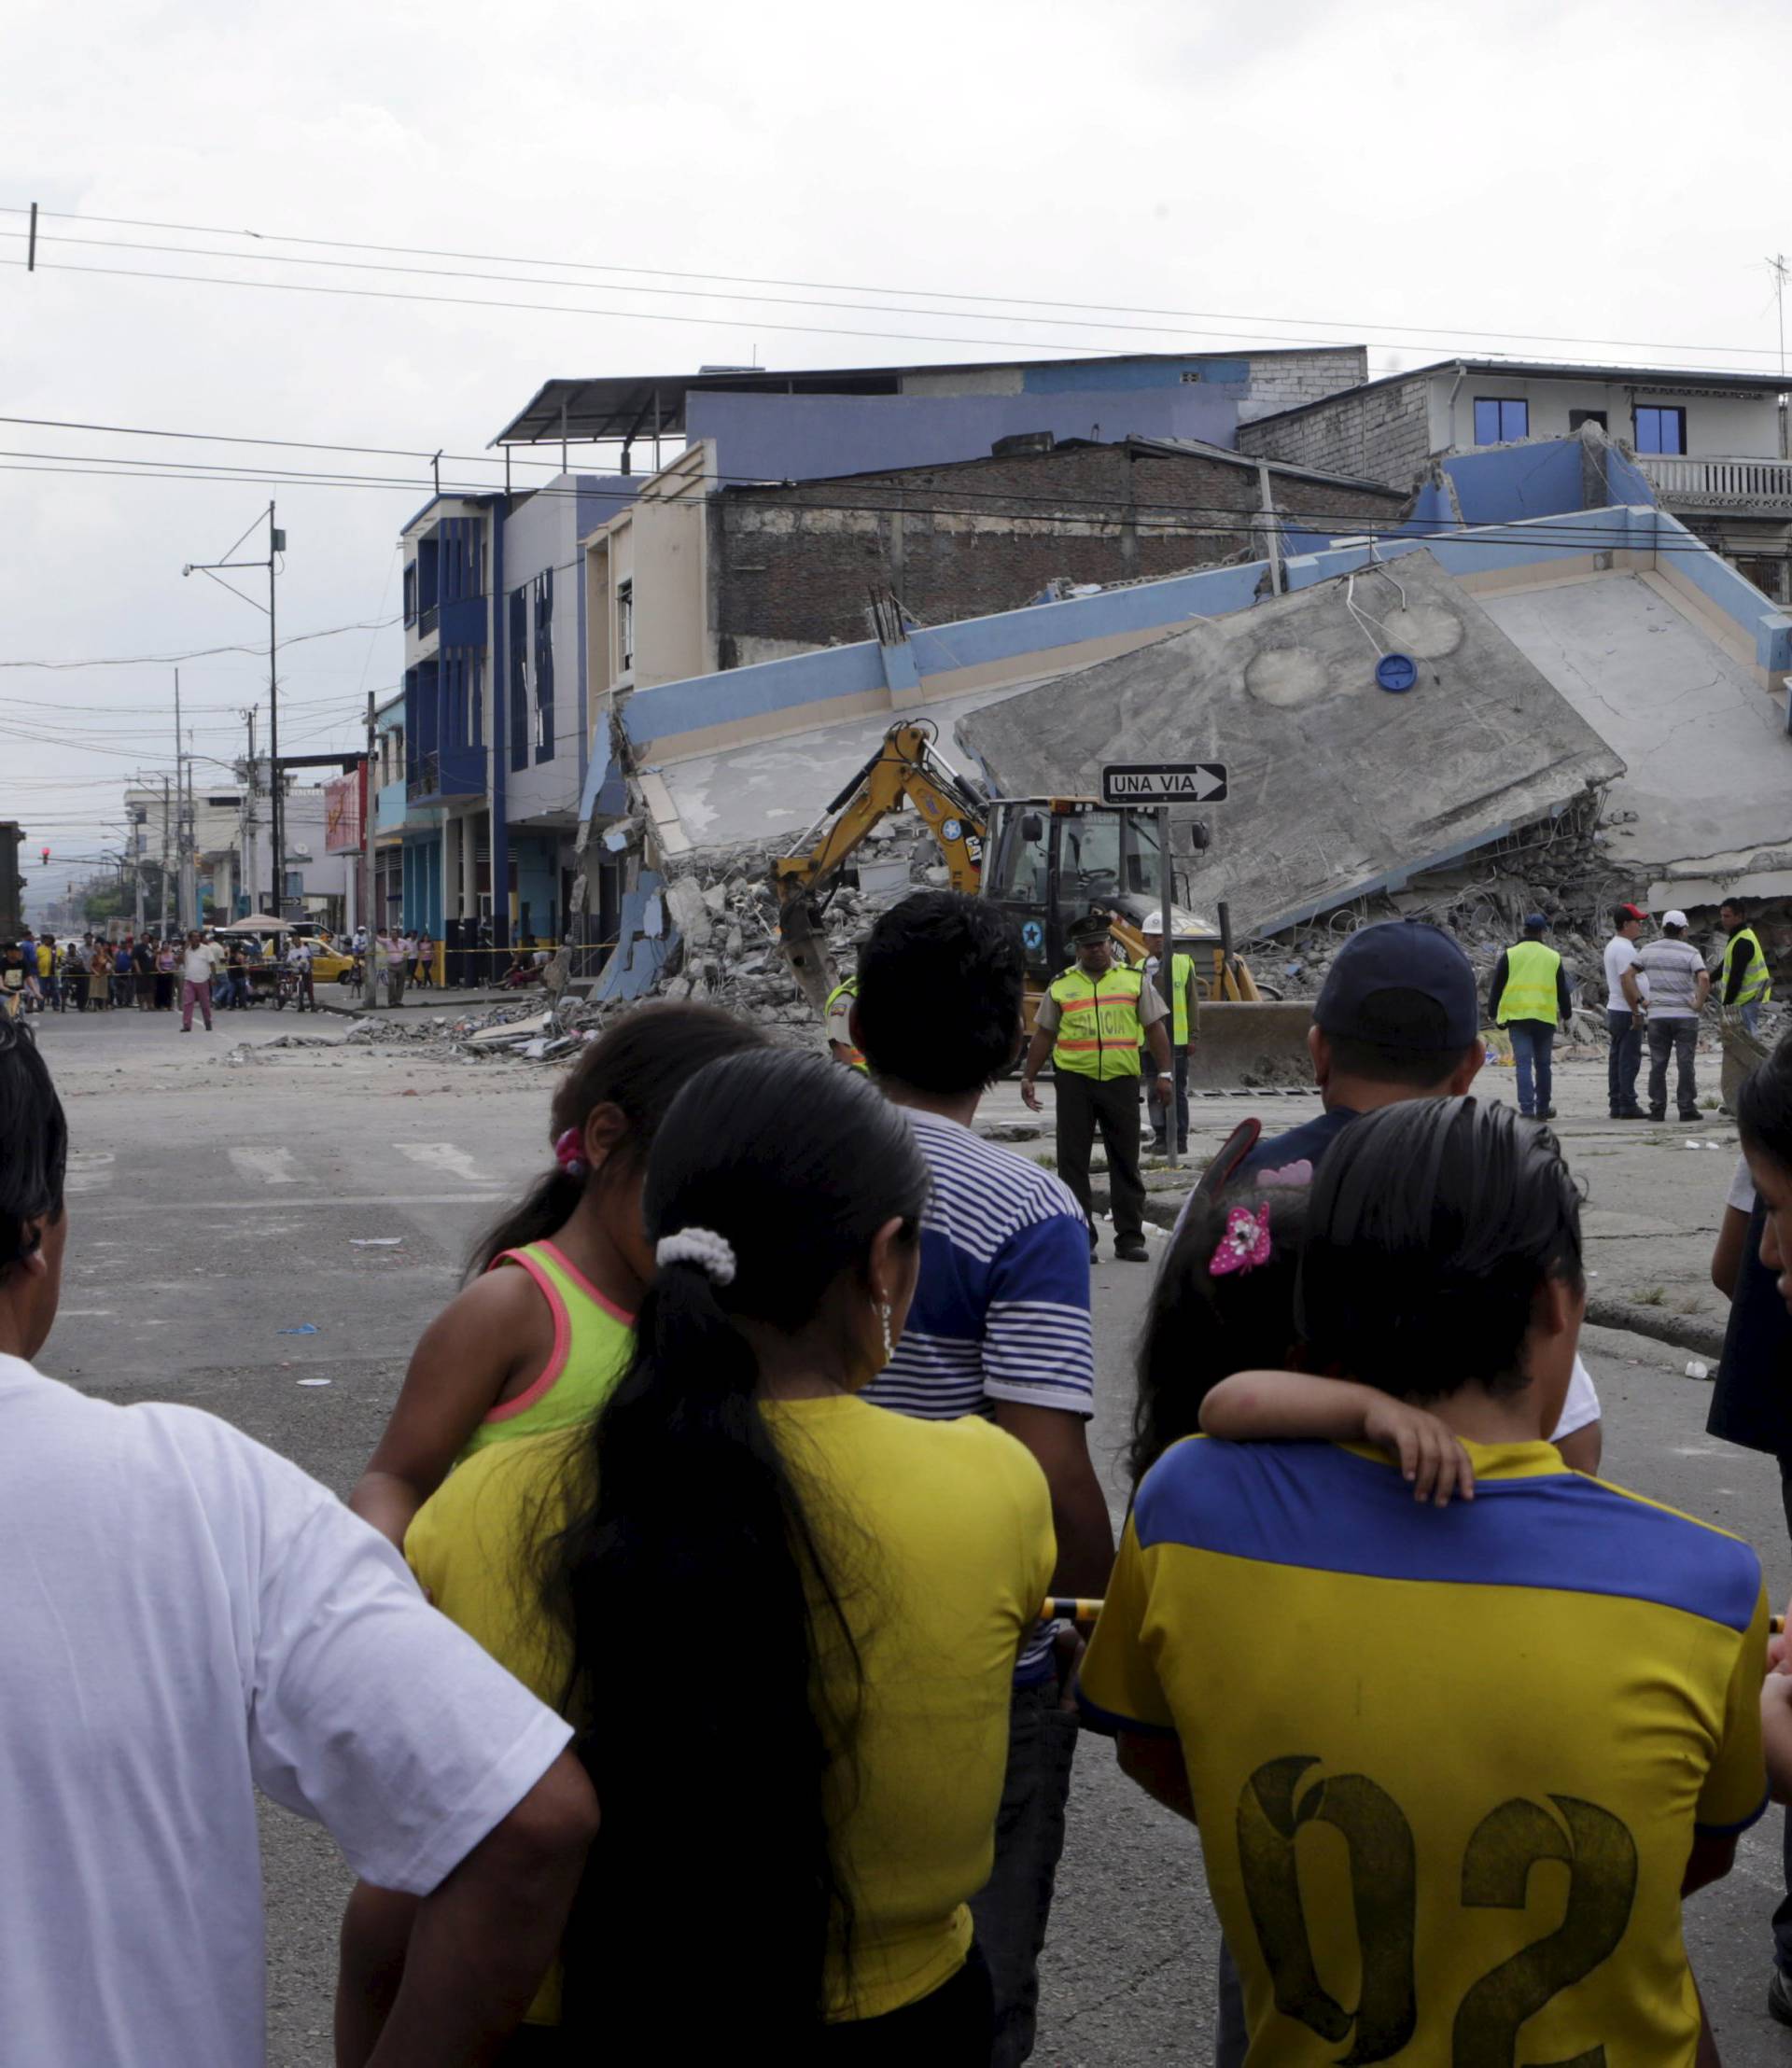 People look at a collapsed building after an earthquake struck off the Pacific coast, in Guayaquil